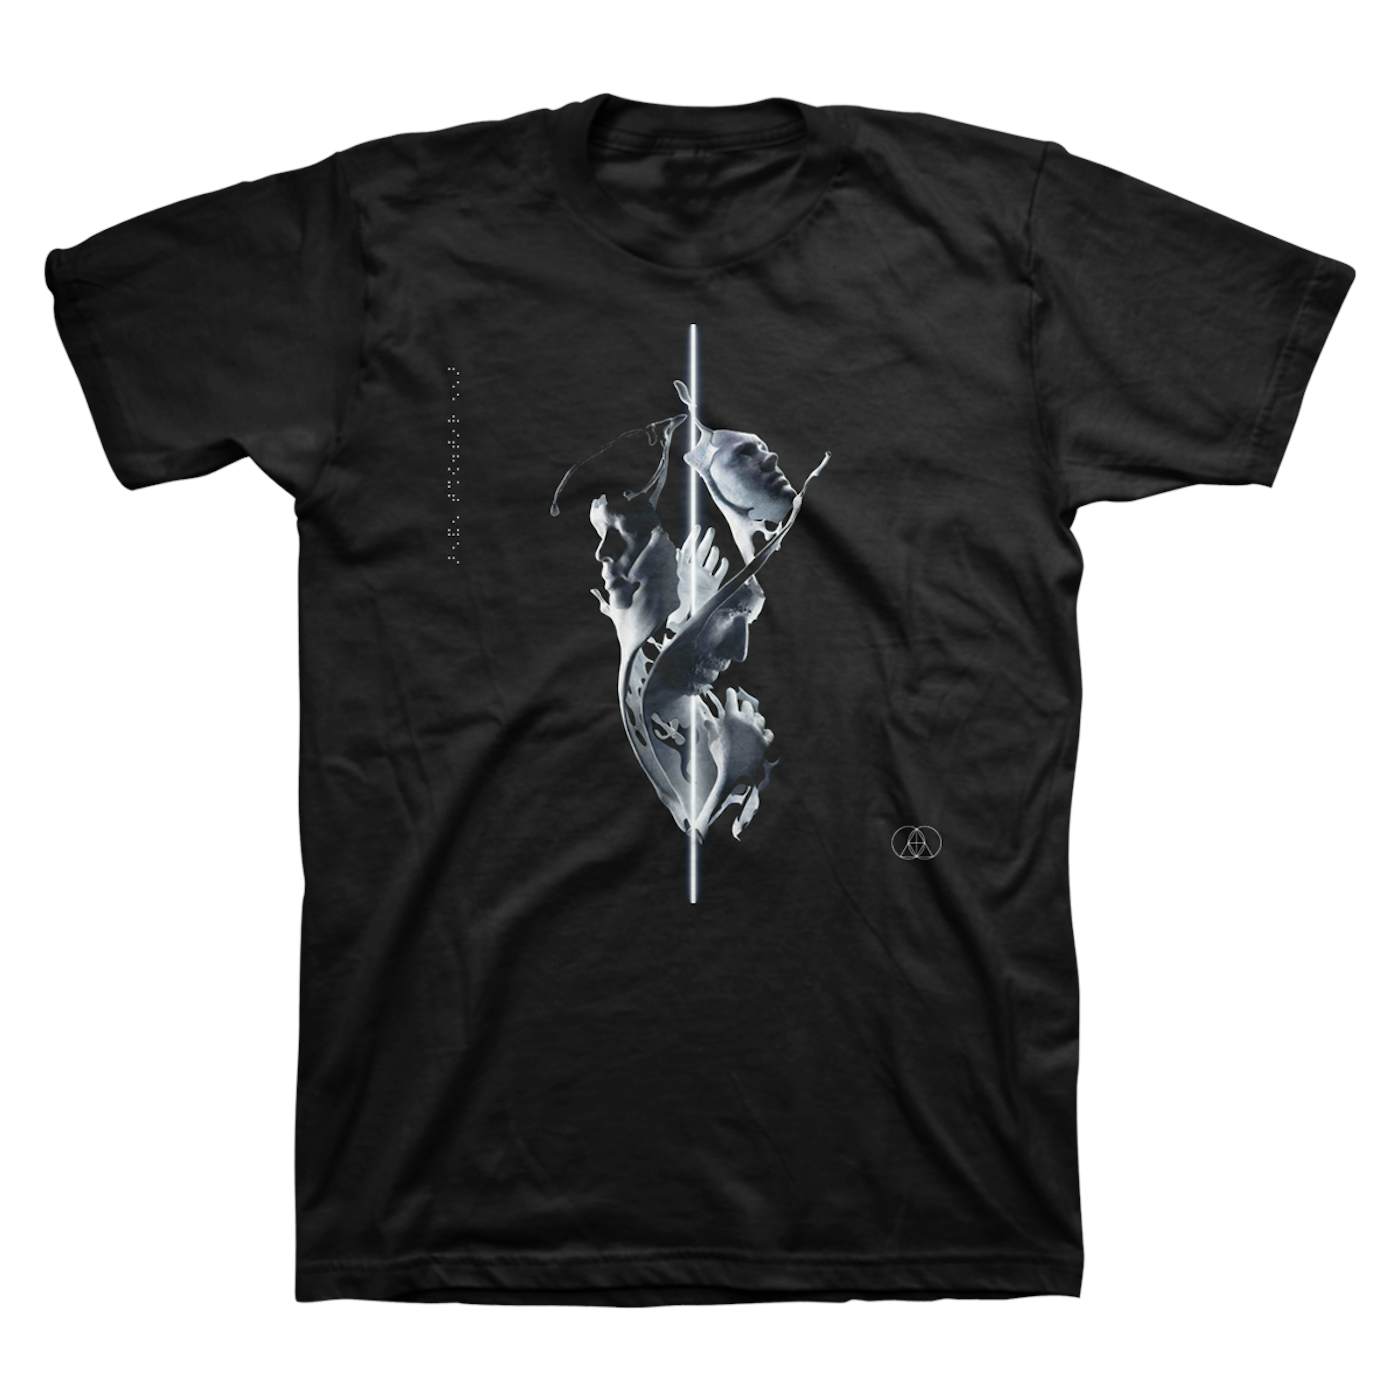 The Glitch Mob SEE WITHOUT EYES TOUR TEE